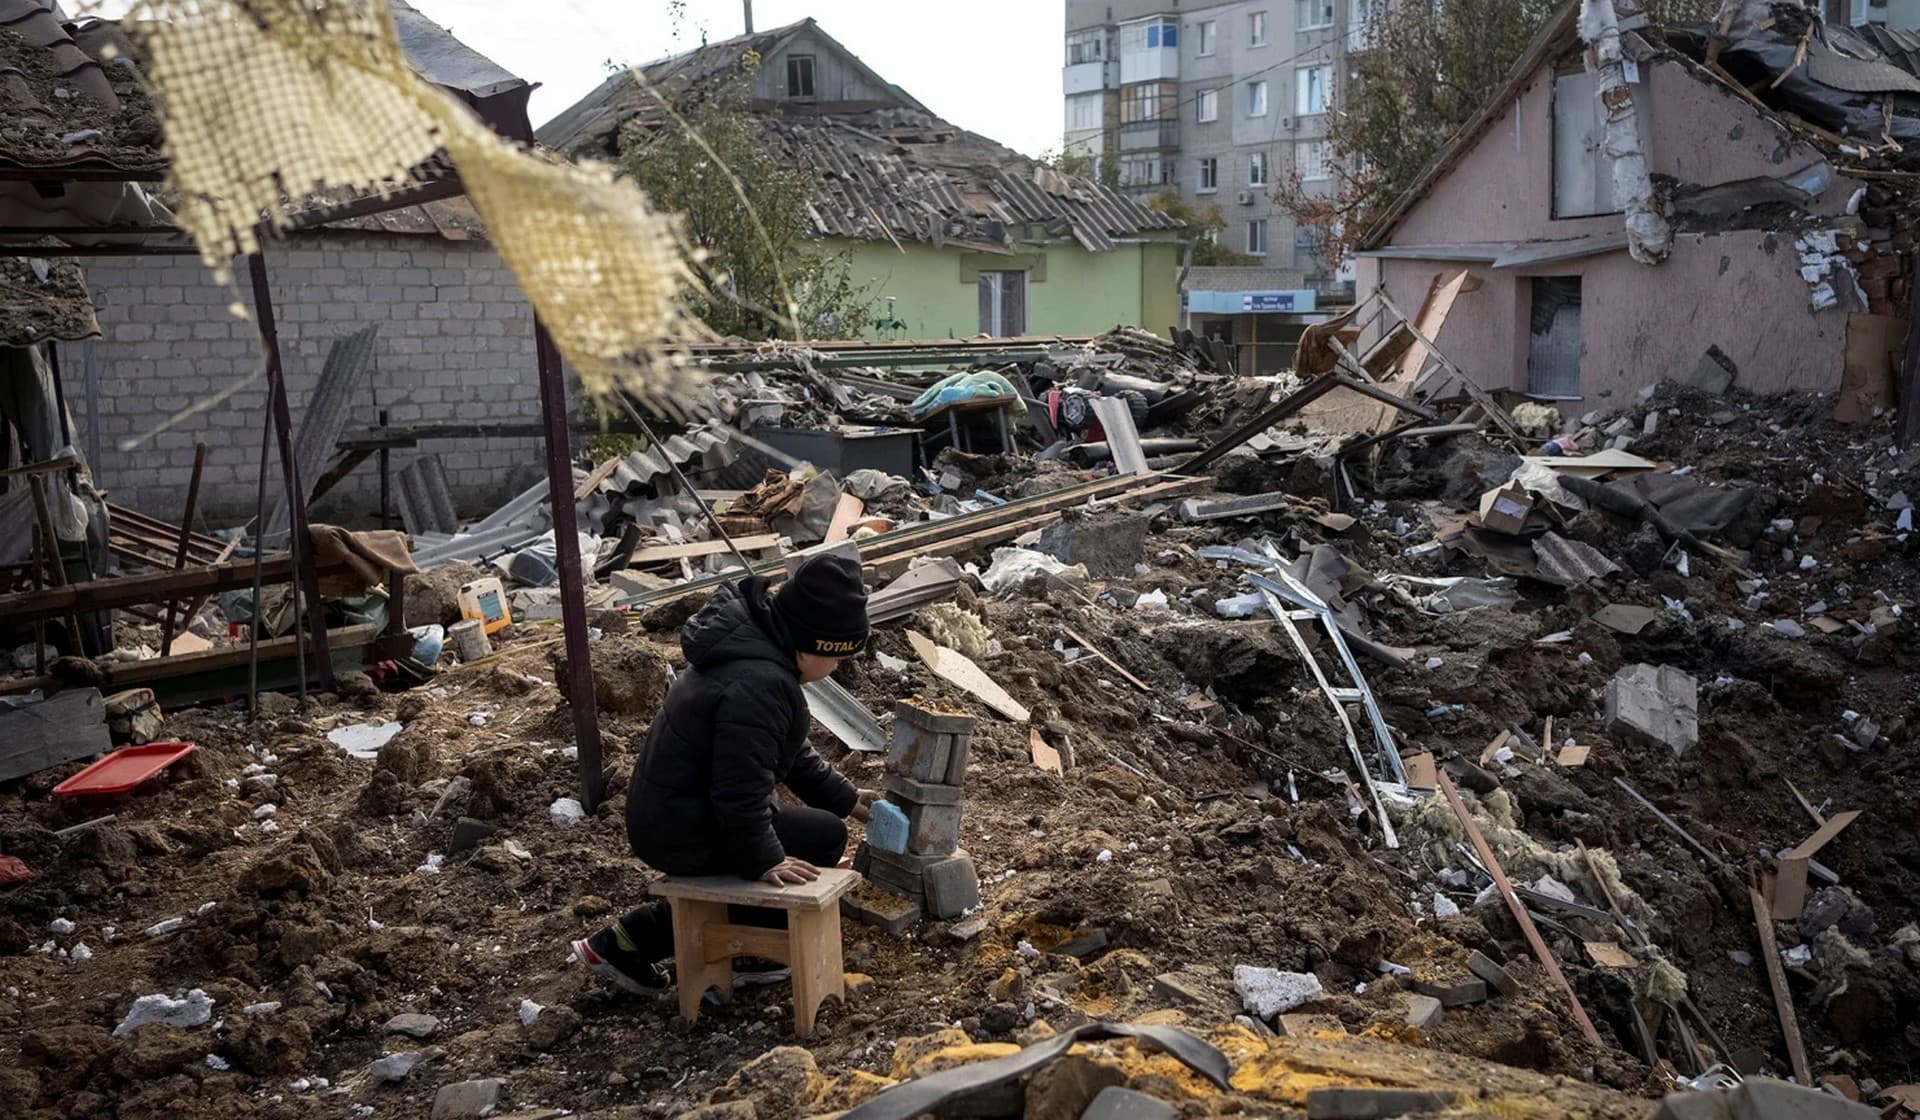 A boy plays on ruins of his grandmother's house in Kupiansk